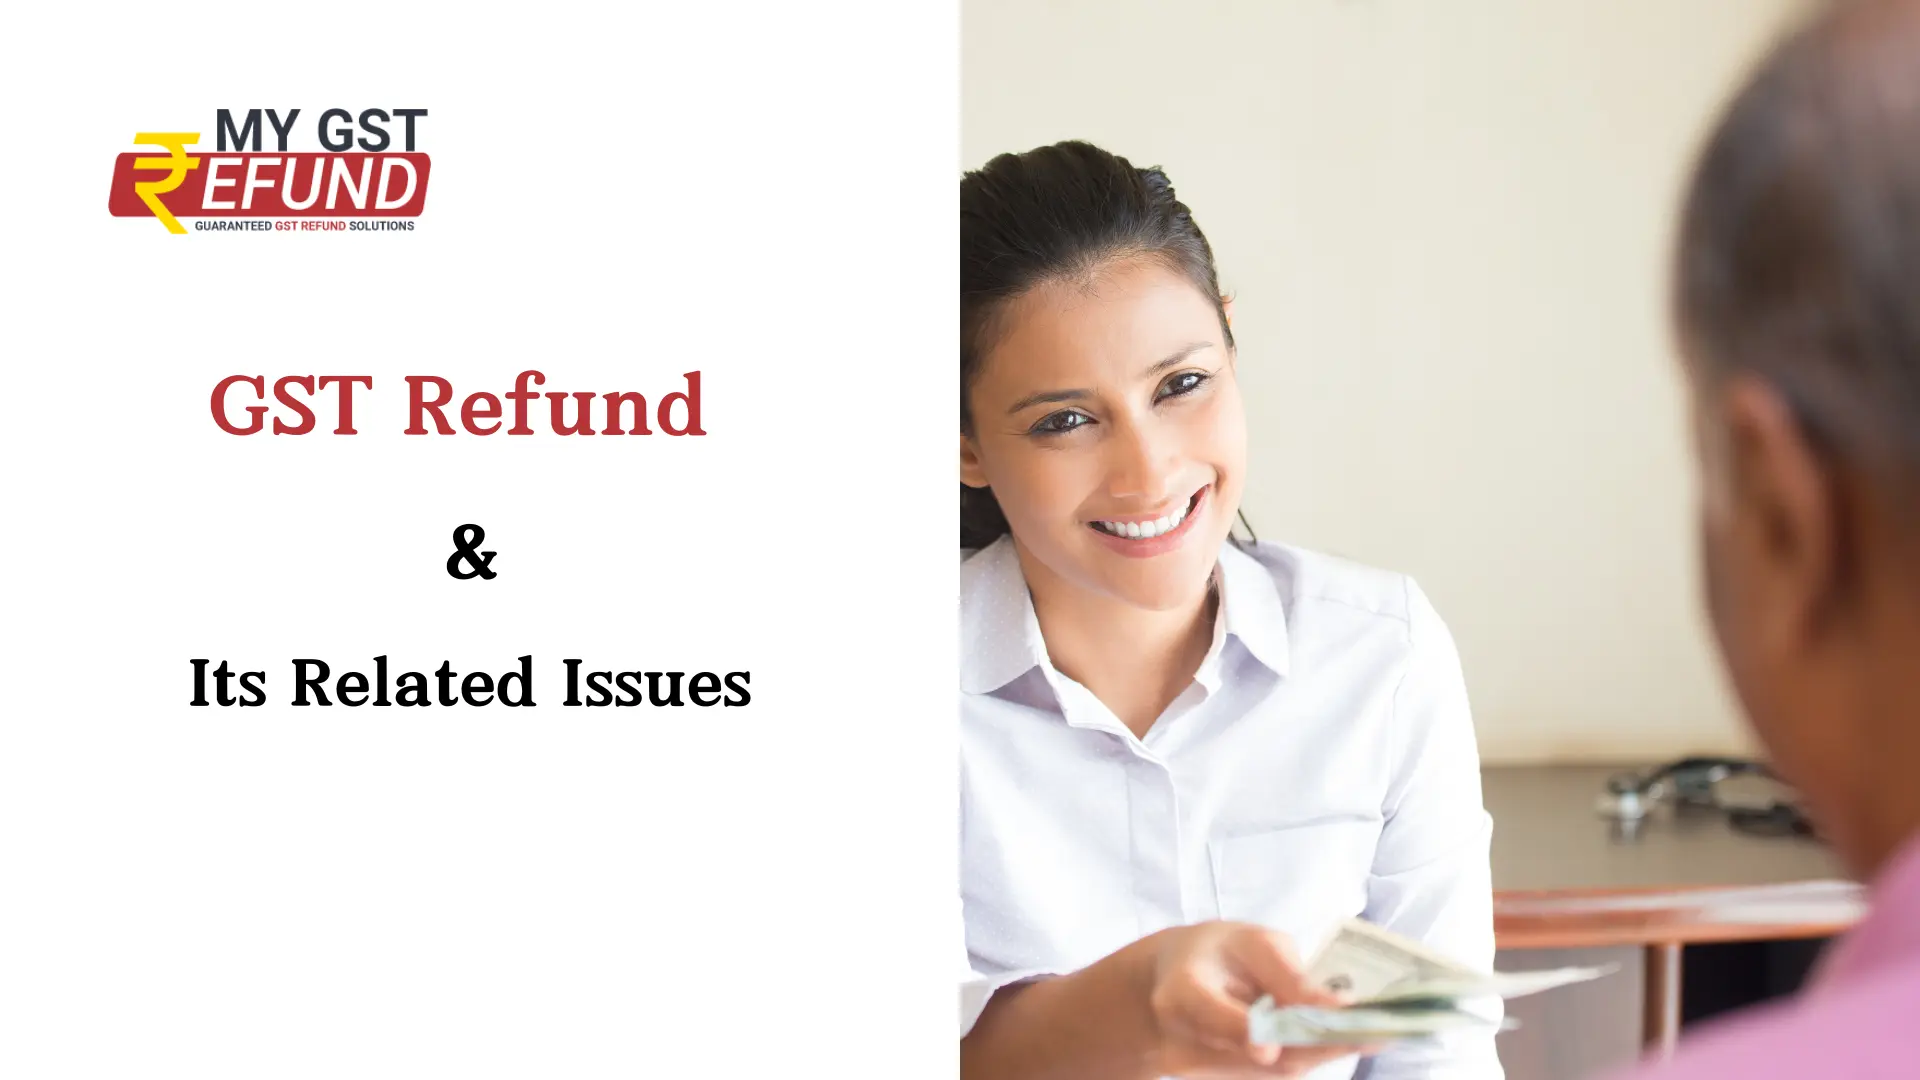 GST Refund & its Related Issues.